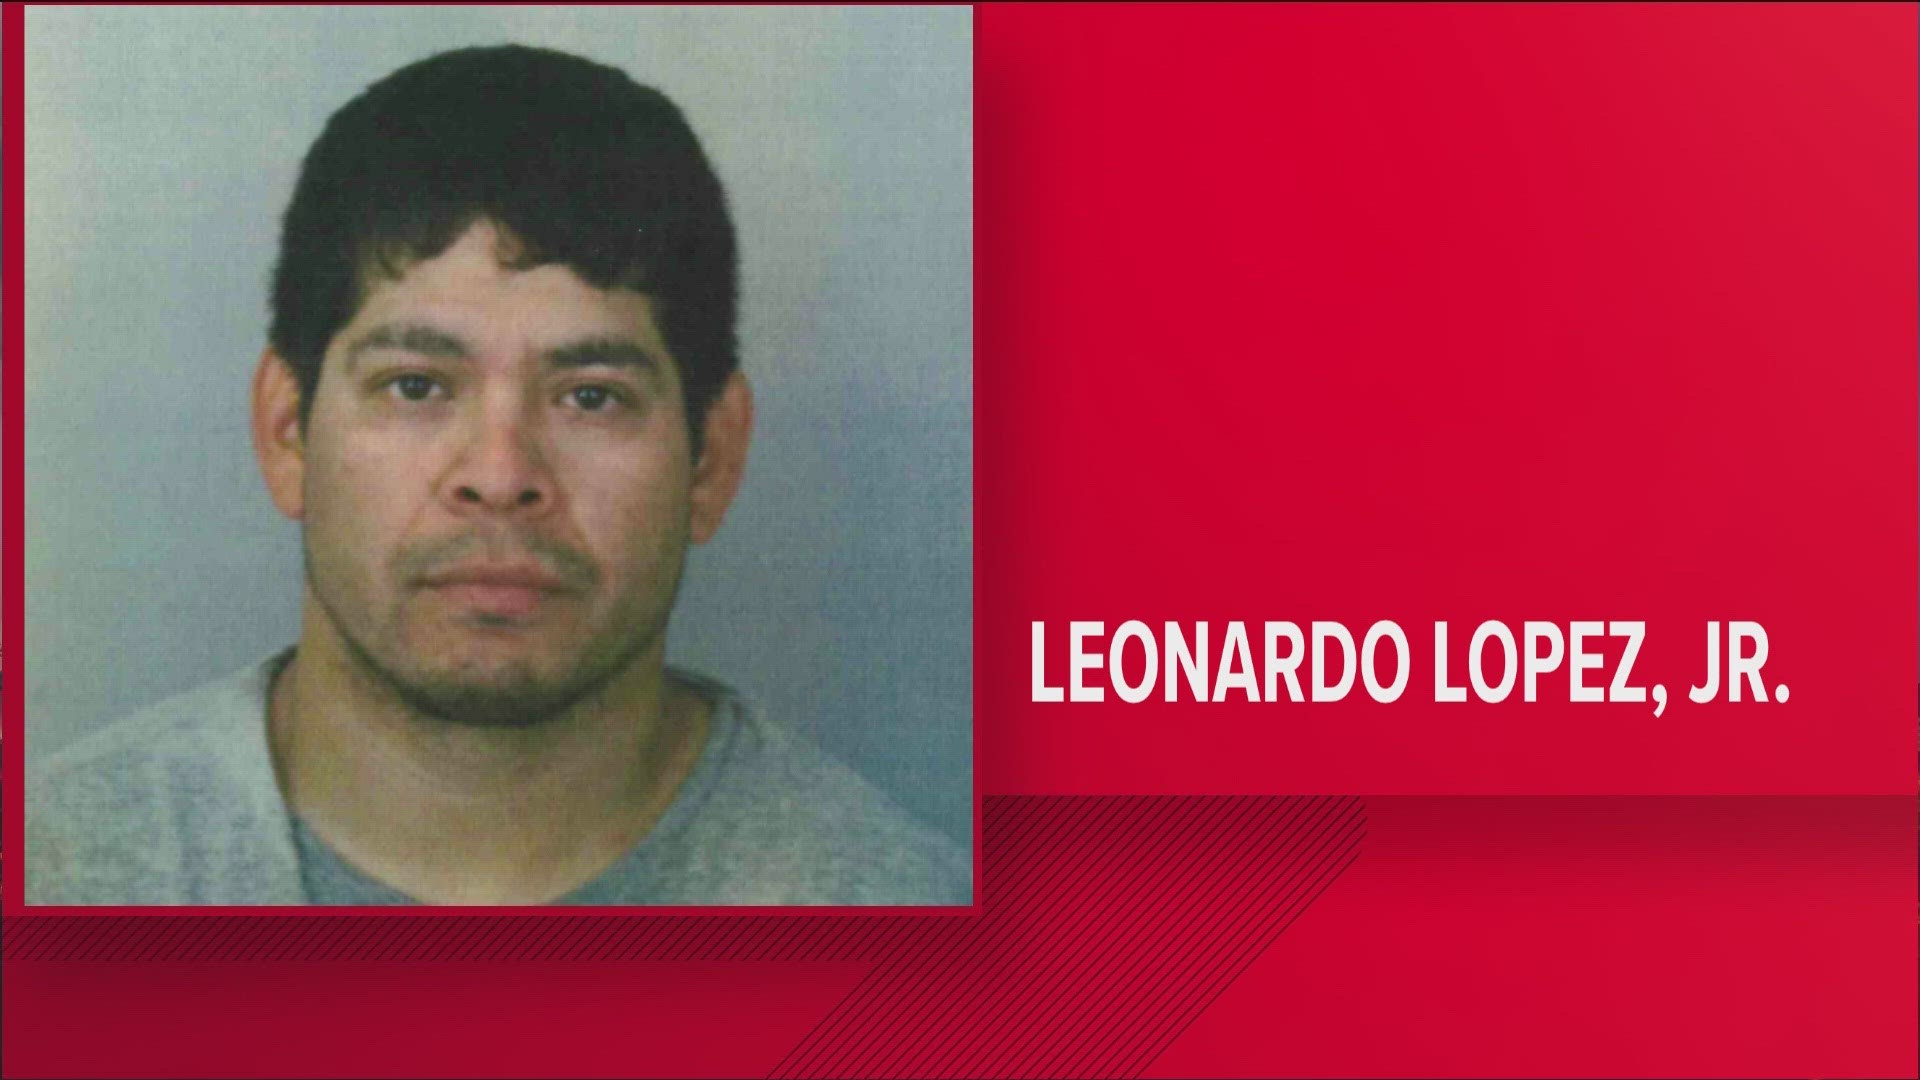 The Watonwan County Sheriff's Office says 36-year-old Leonardo Lopez is back in custody two days after escaping from custody.